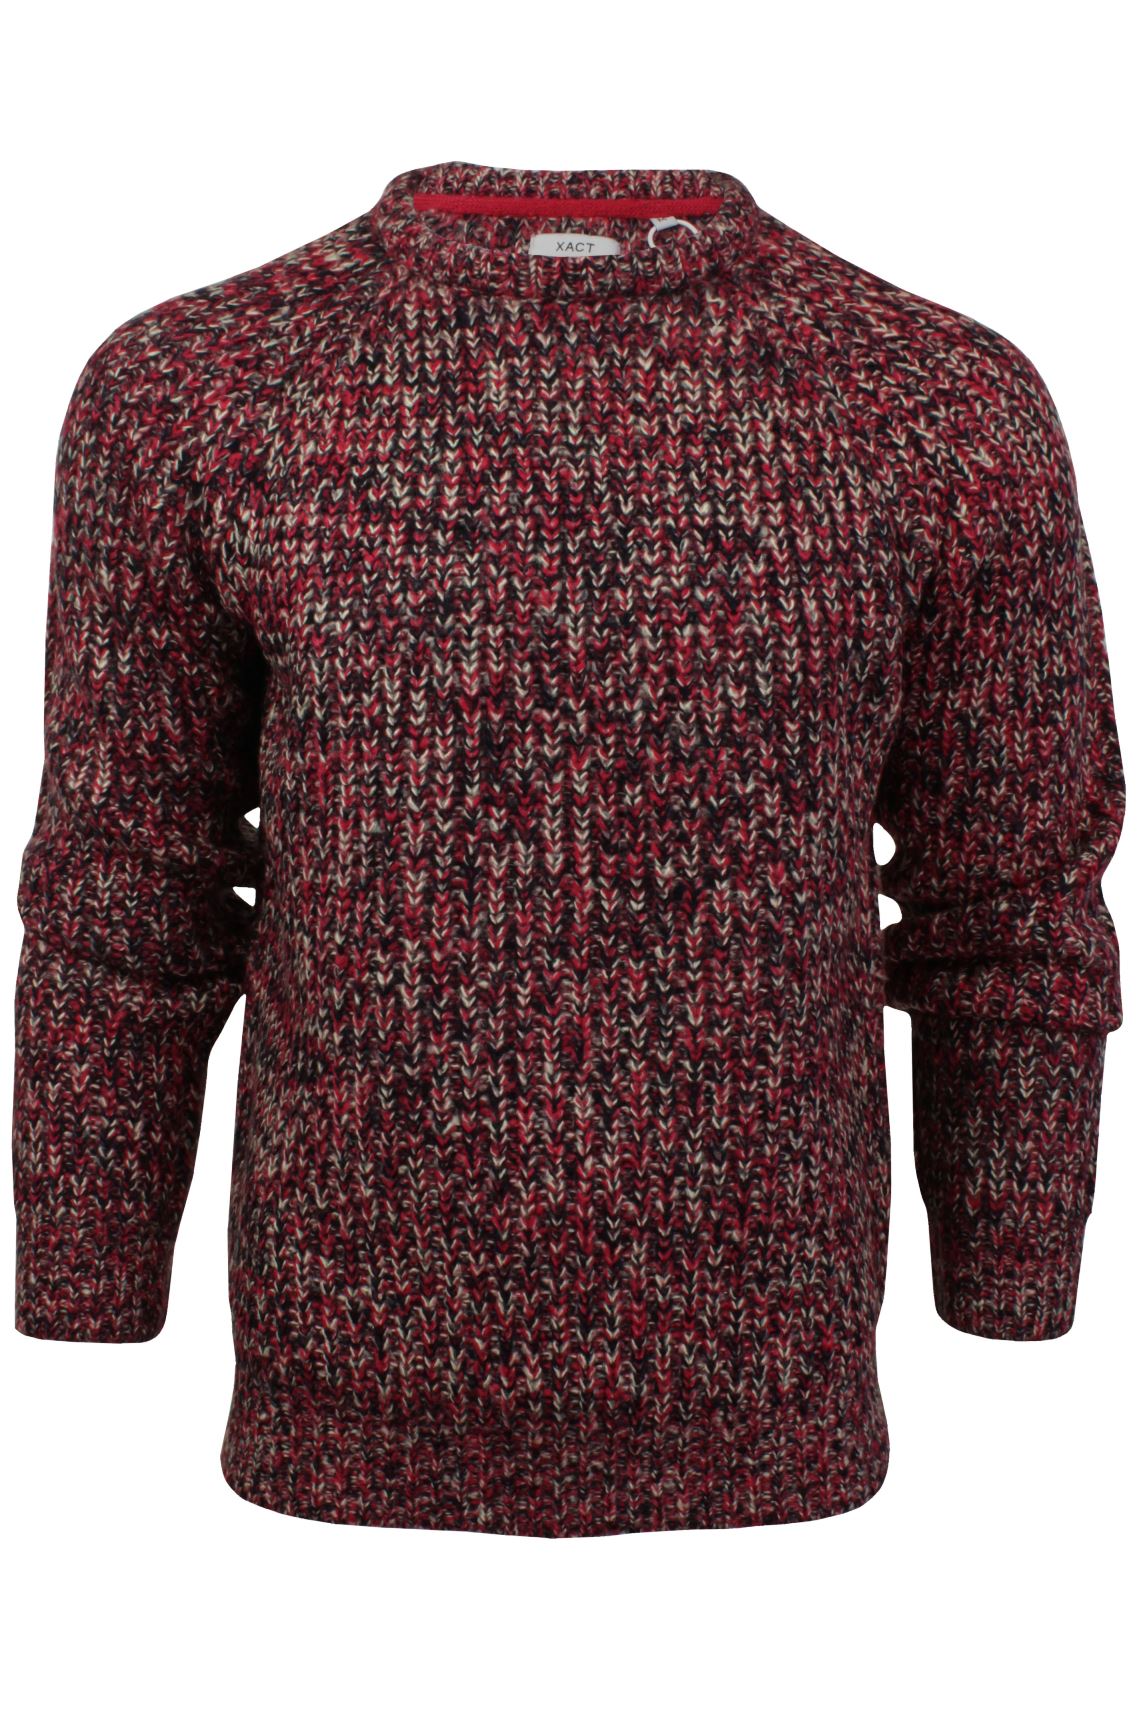 Mens Twist Crew Neck Jumper by Xact Long Sleeved (Red)-Main Image